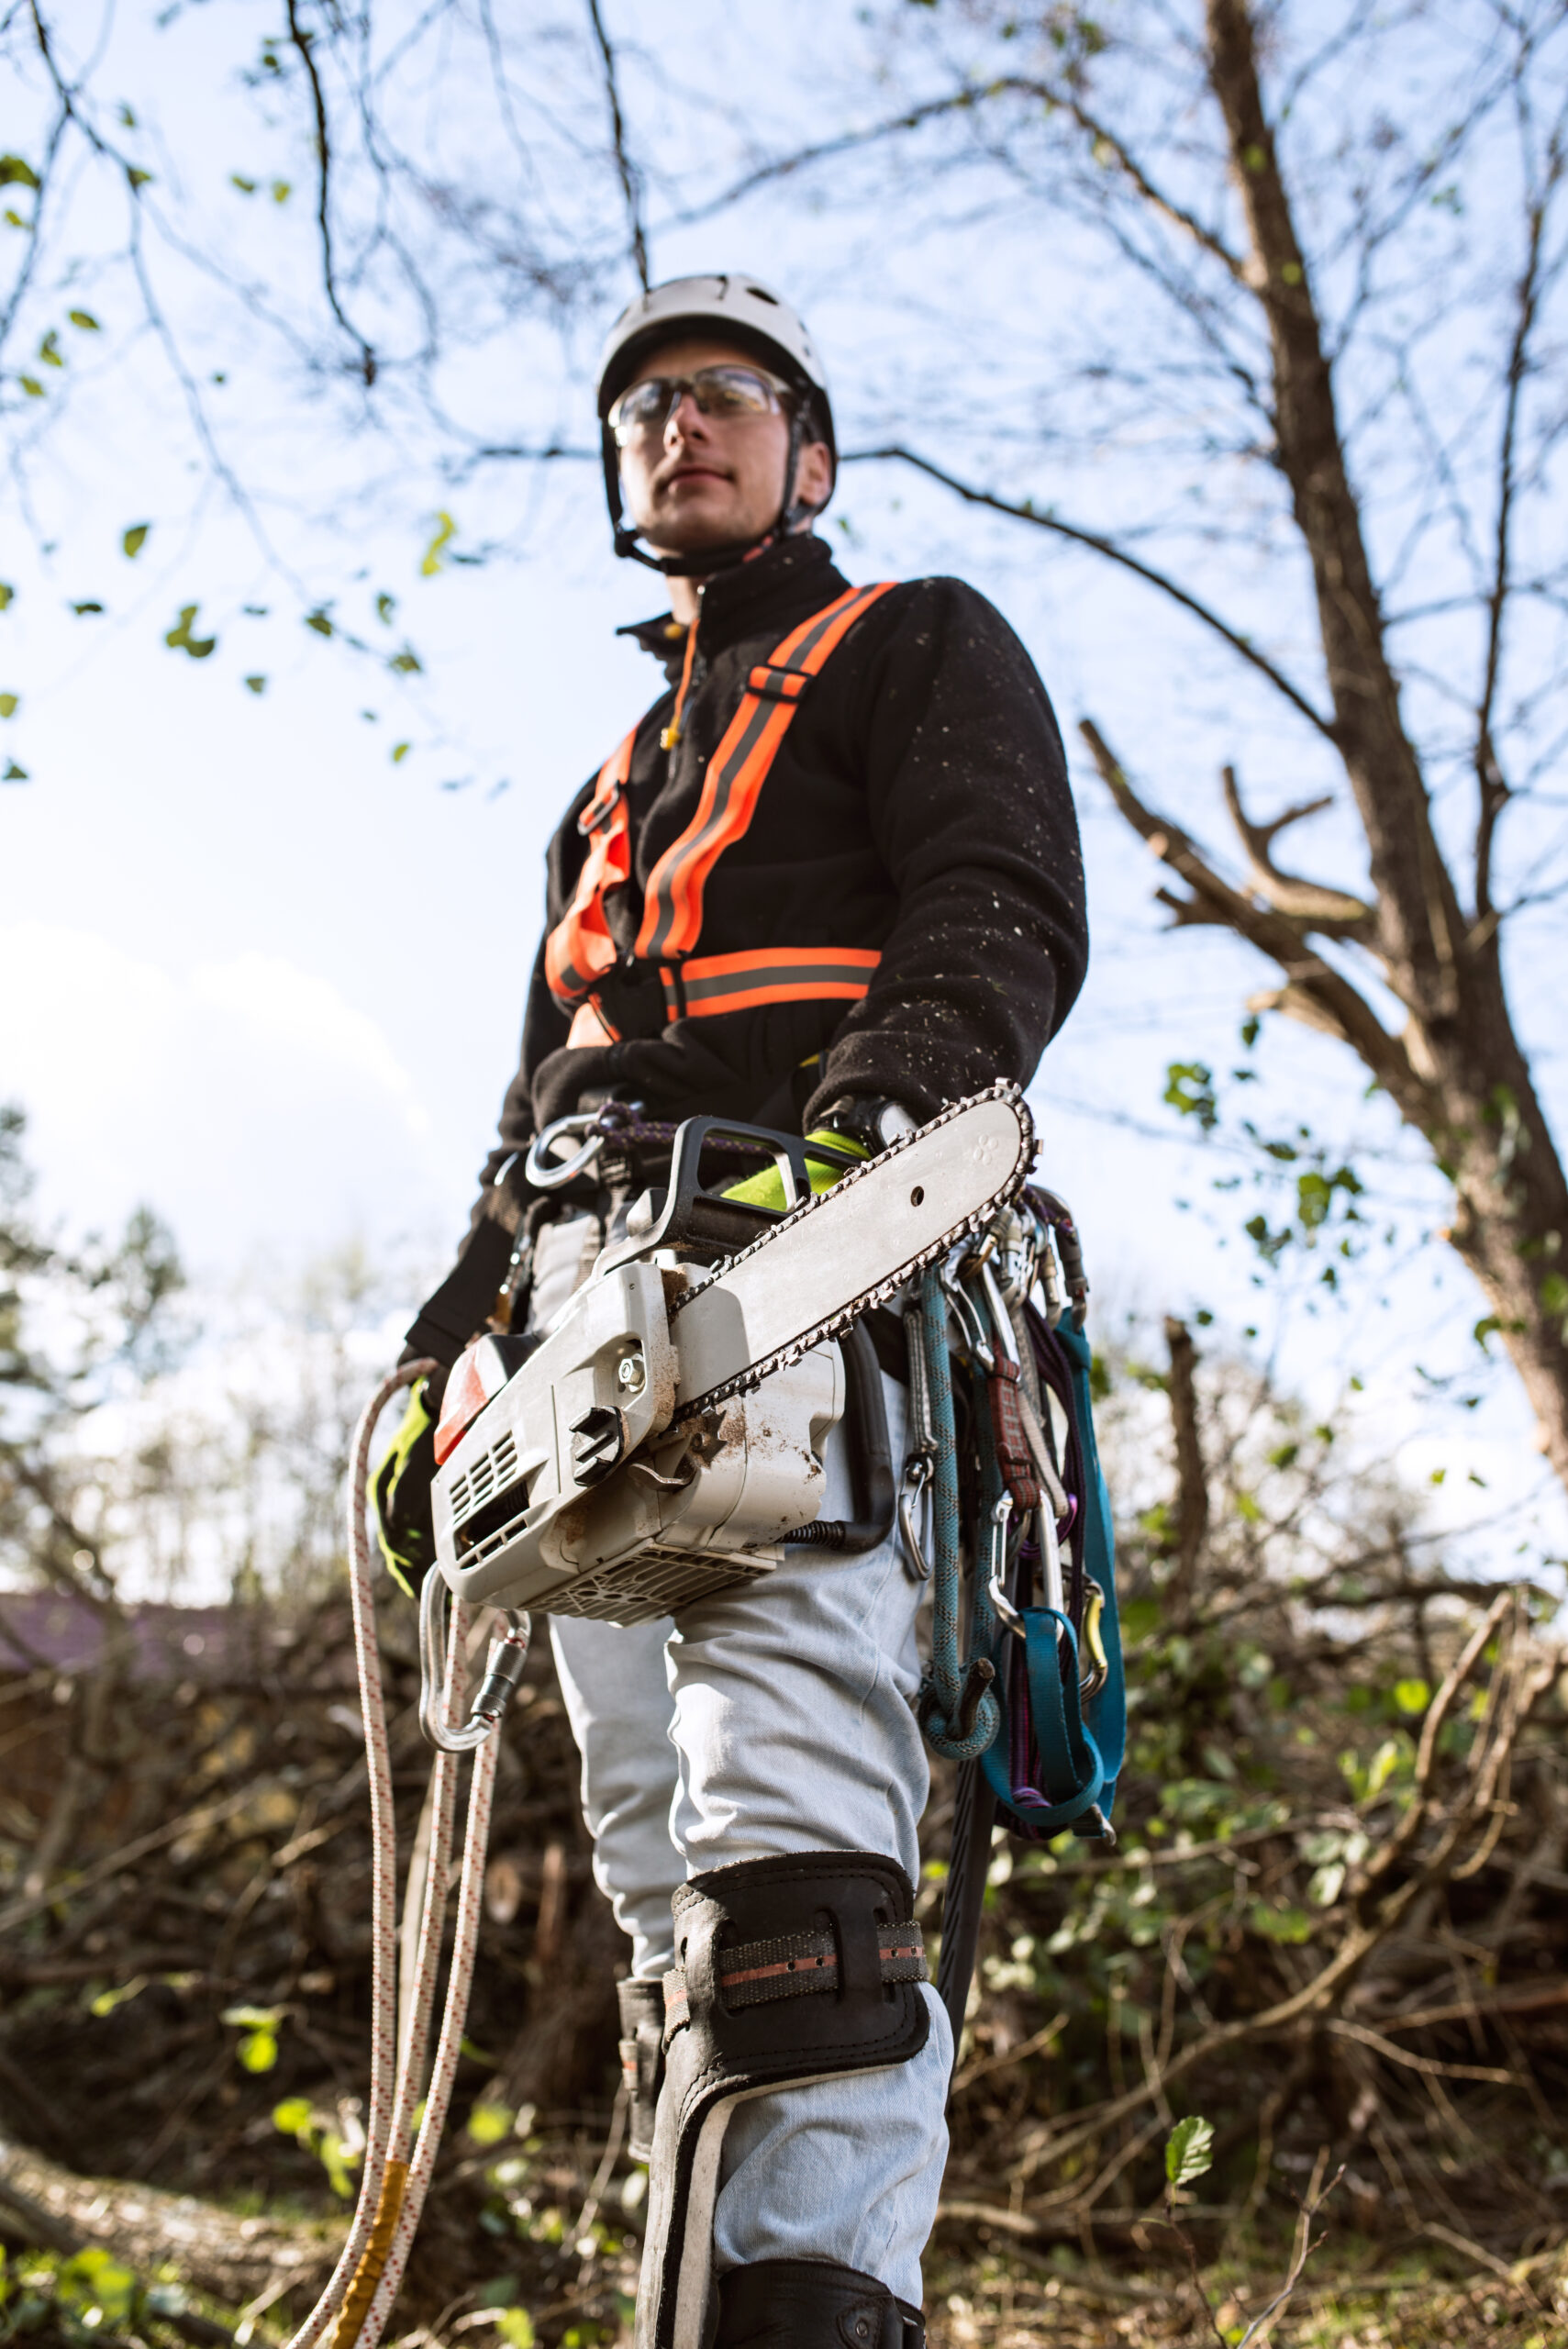 Lumberjack with chainsaw and arborist safety gear preparing to cut down trees and branches as a part of tree service